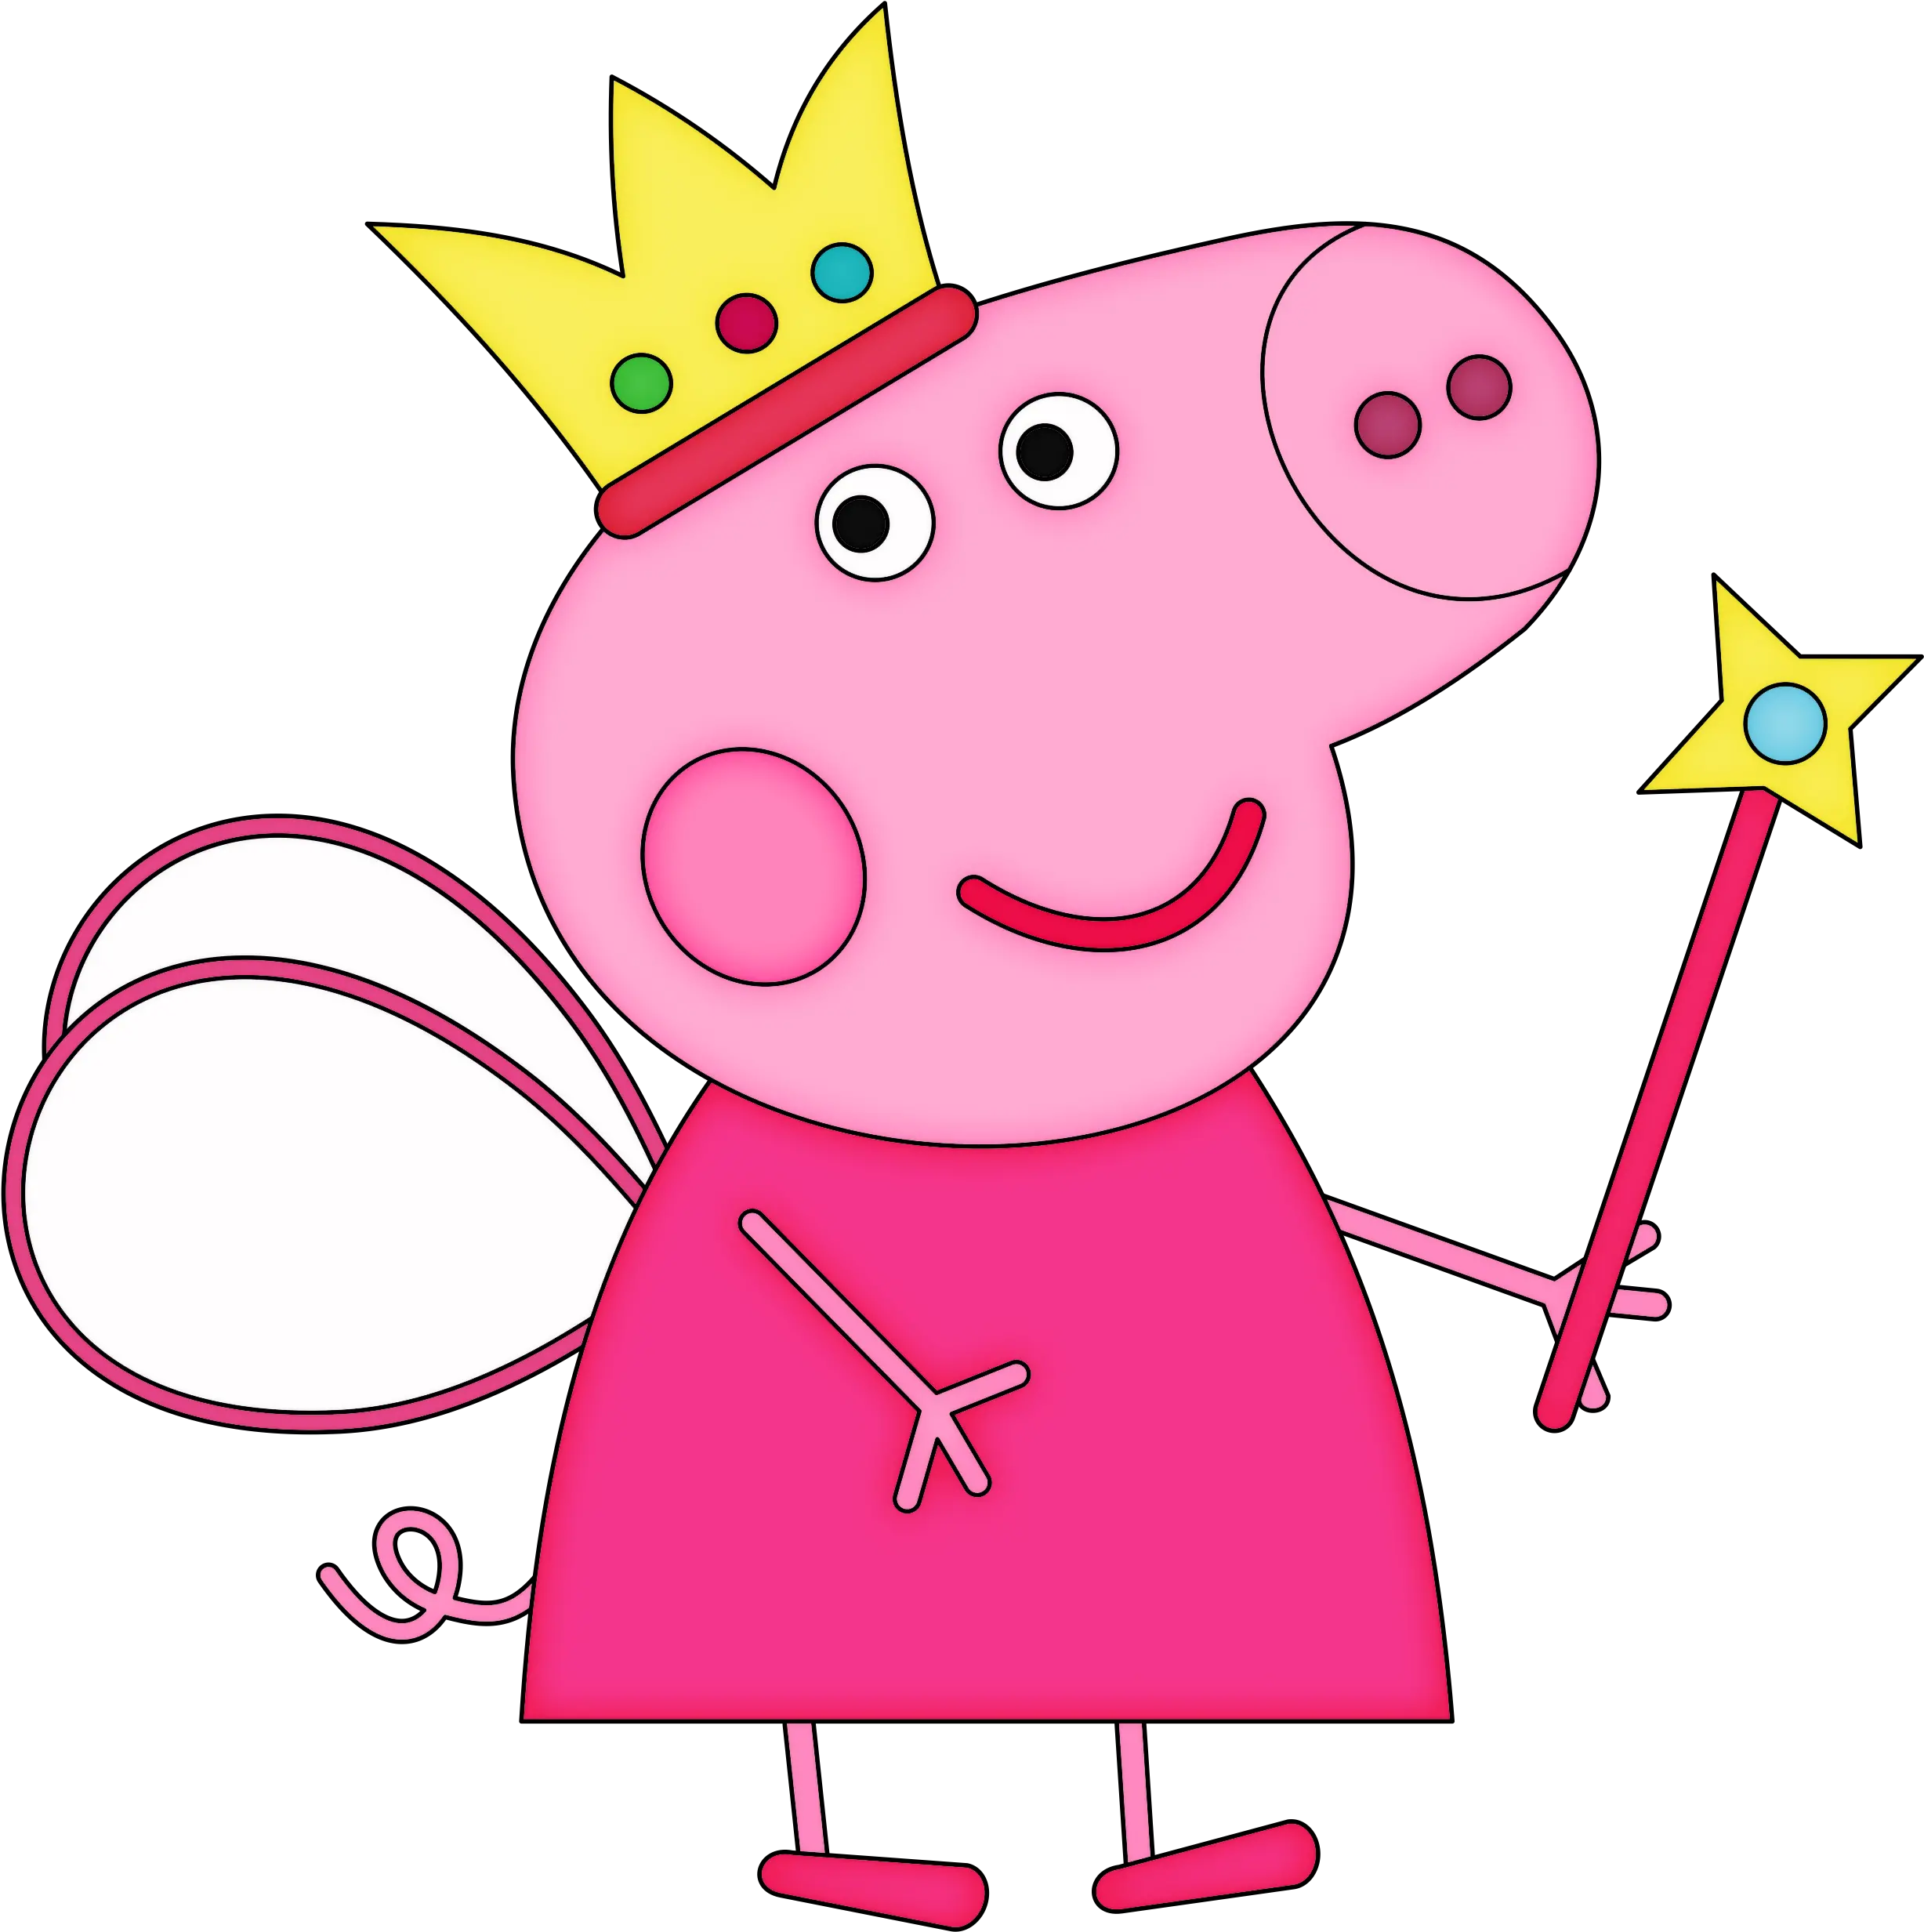 Peppa Pig Family Png Posted By John Sellers Fairy Princess Peppa Pig Pig Transparent Background